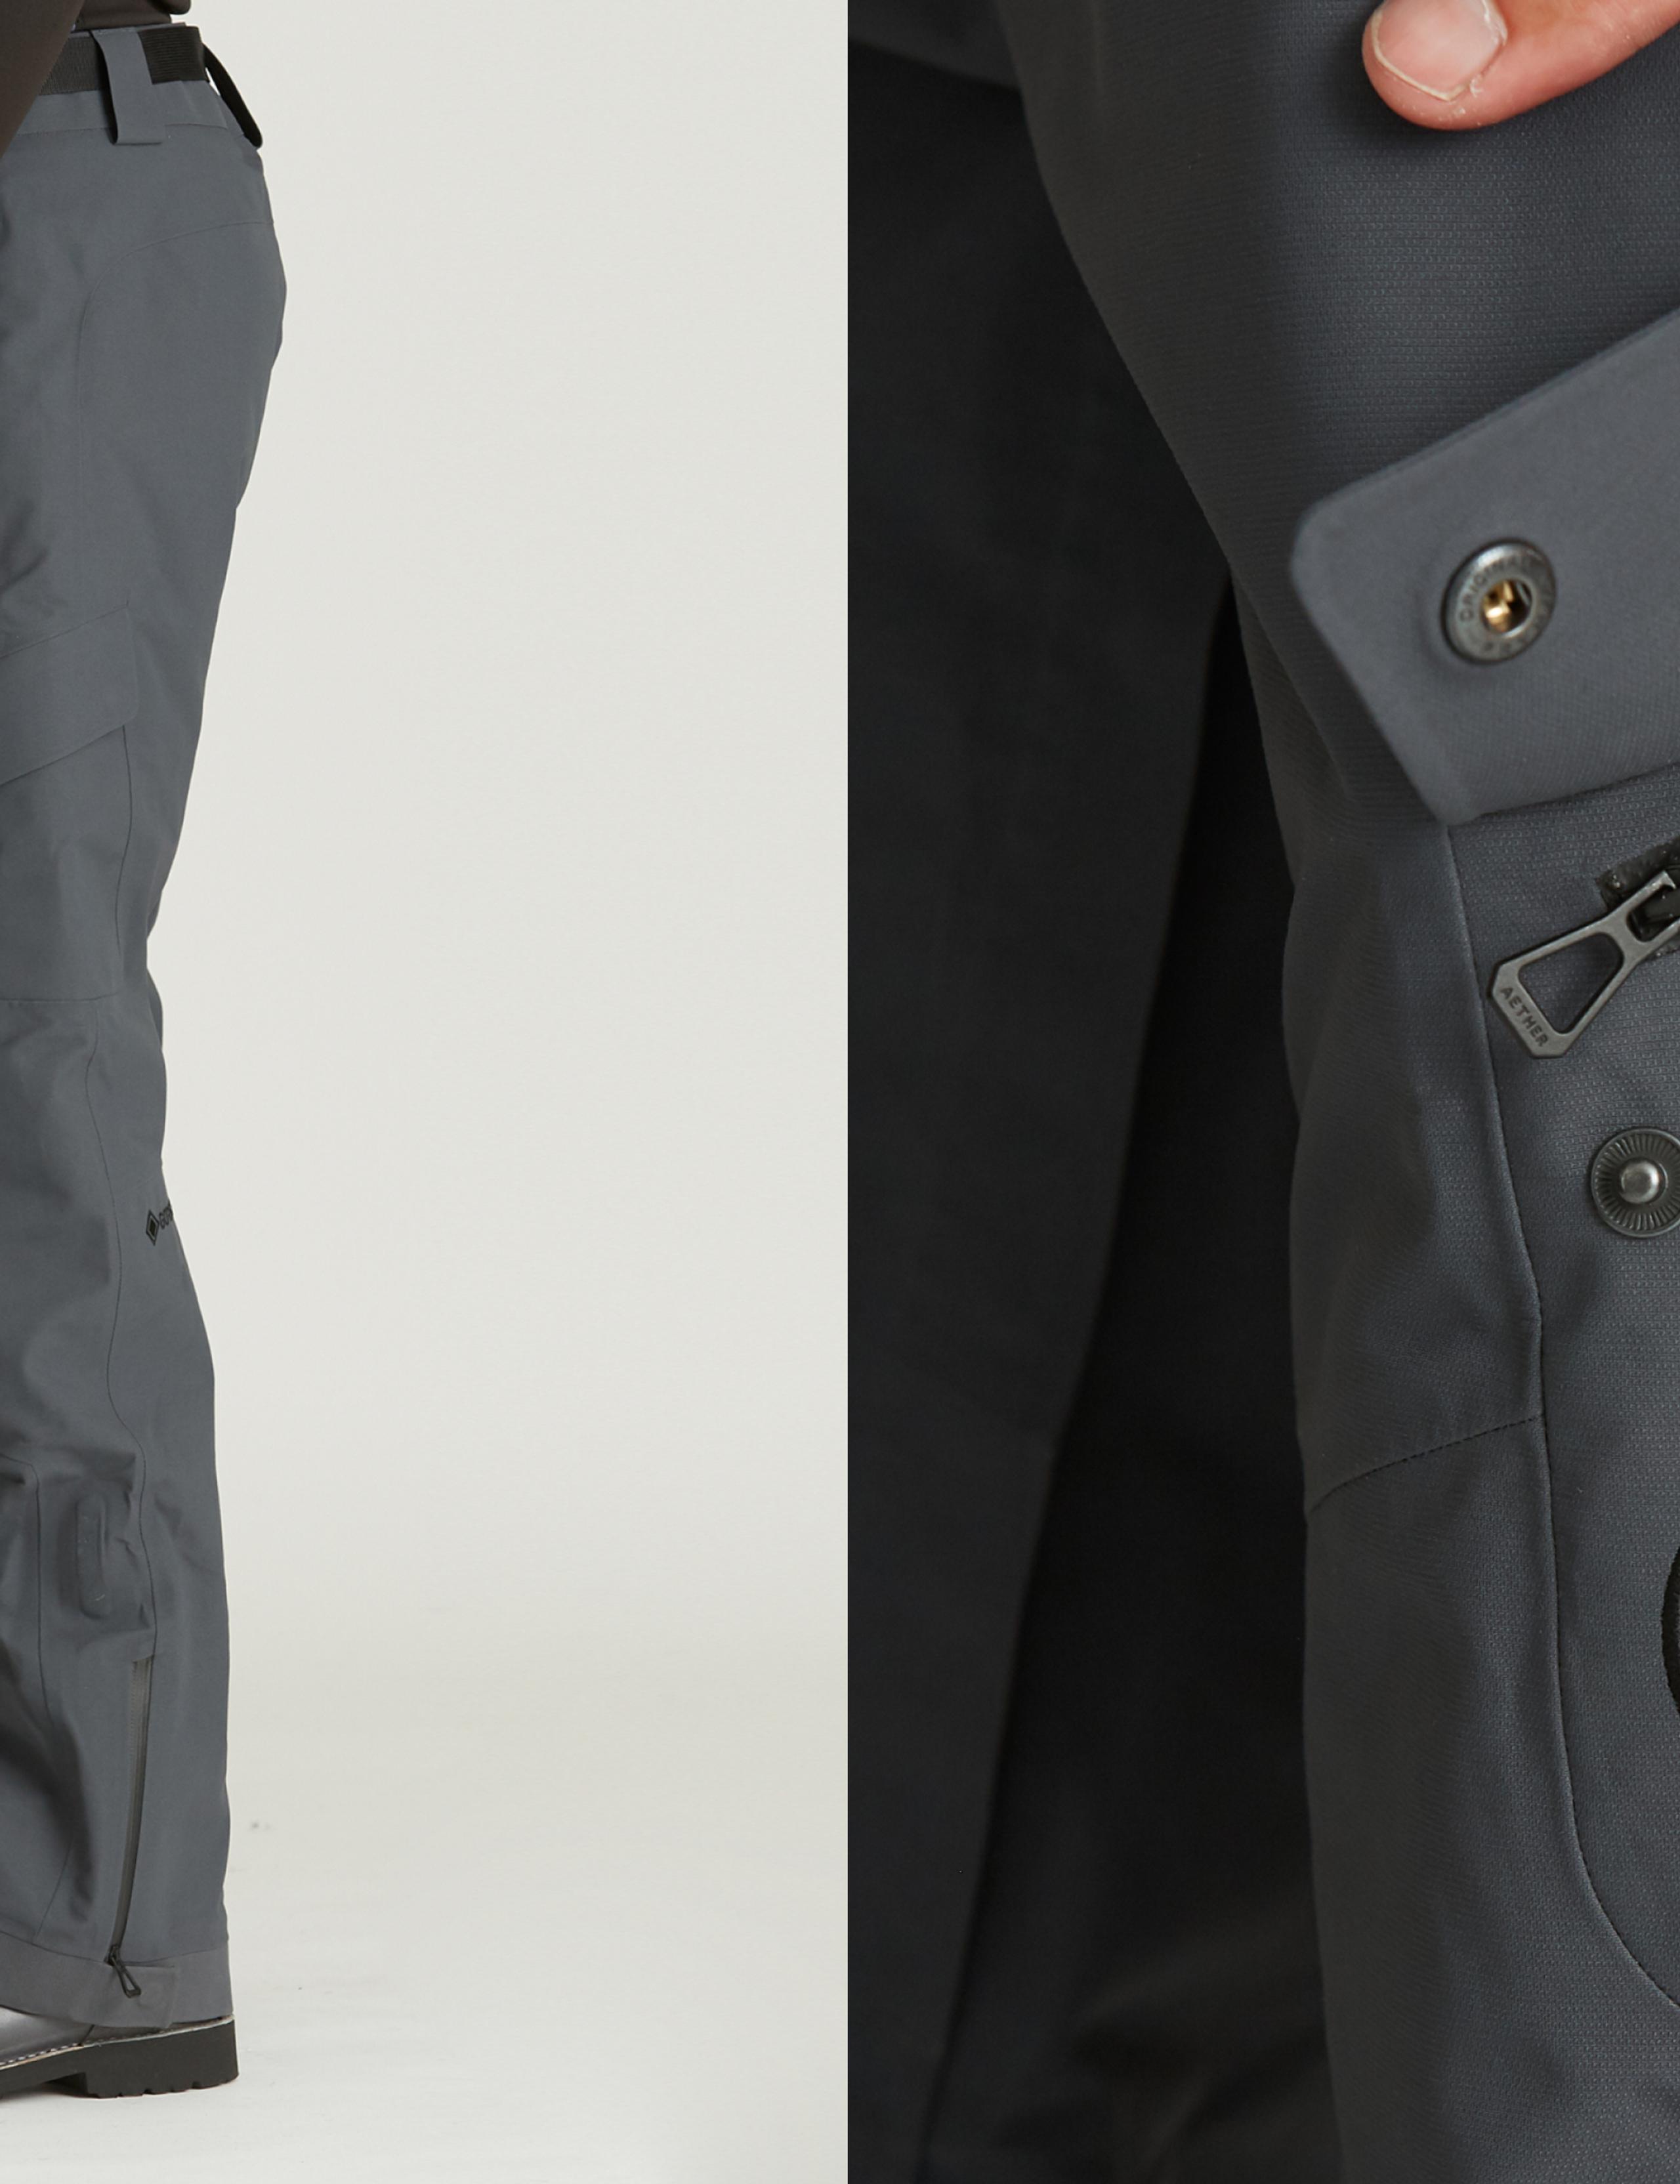 Photo on left is profile view of man wearing Caryle Snow Pant and on the right is a man opening the cargo pocket